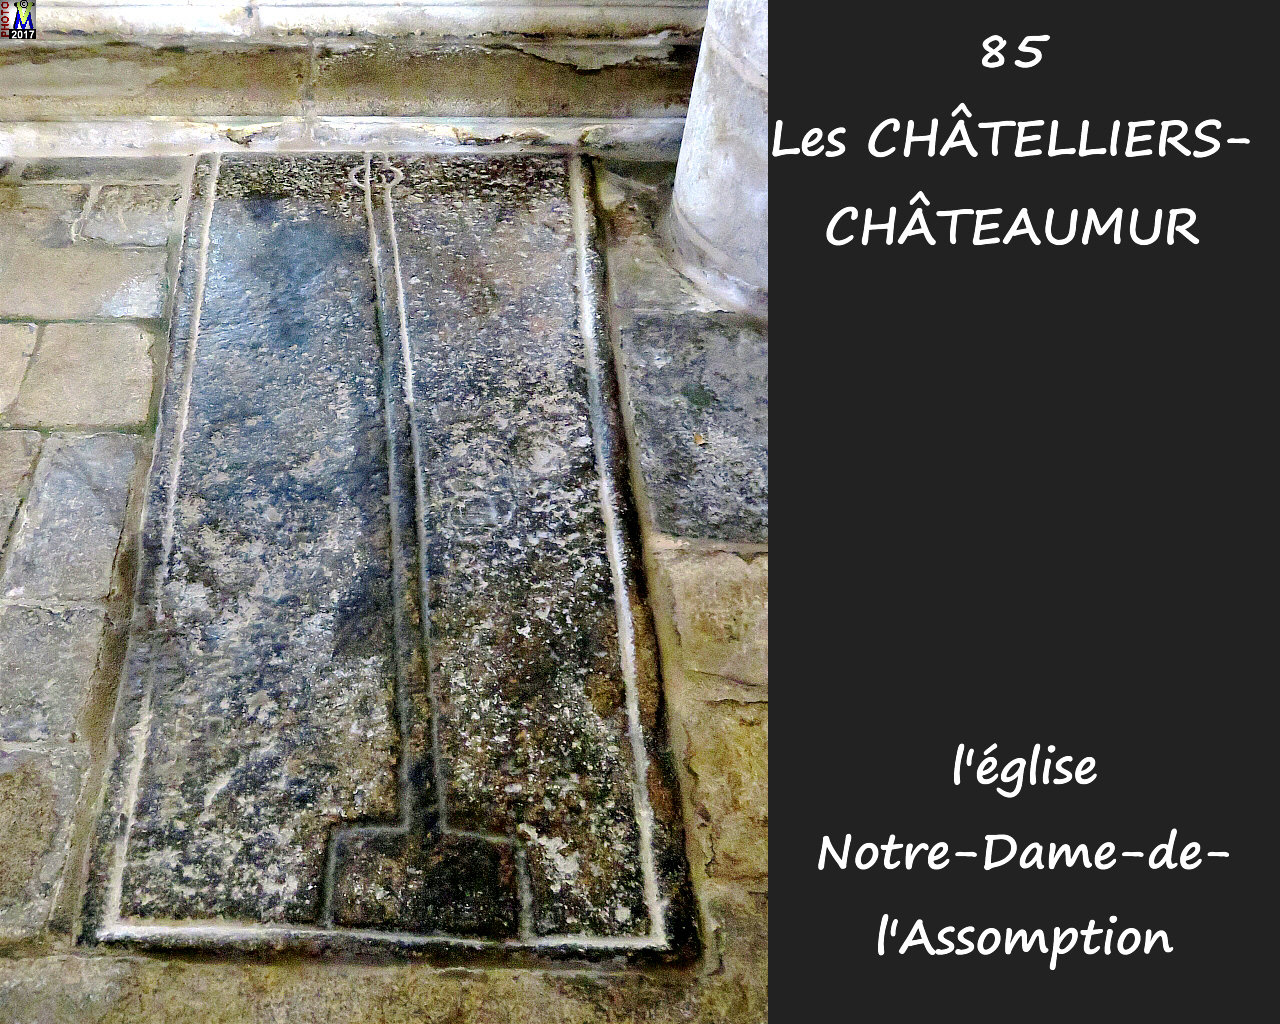 85CHATELLIERS-CHATEAUMUR_eglise_1140.jpg